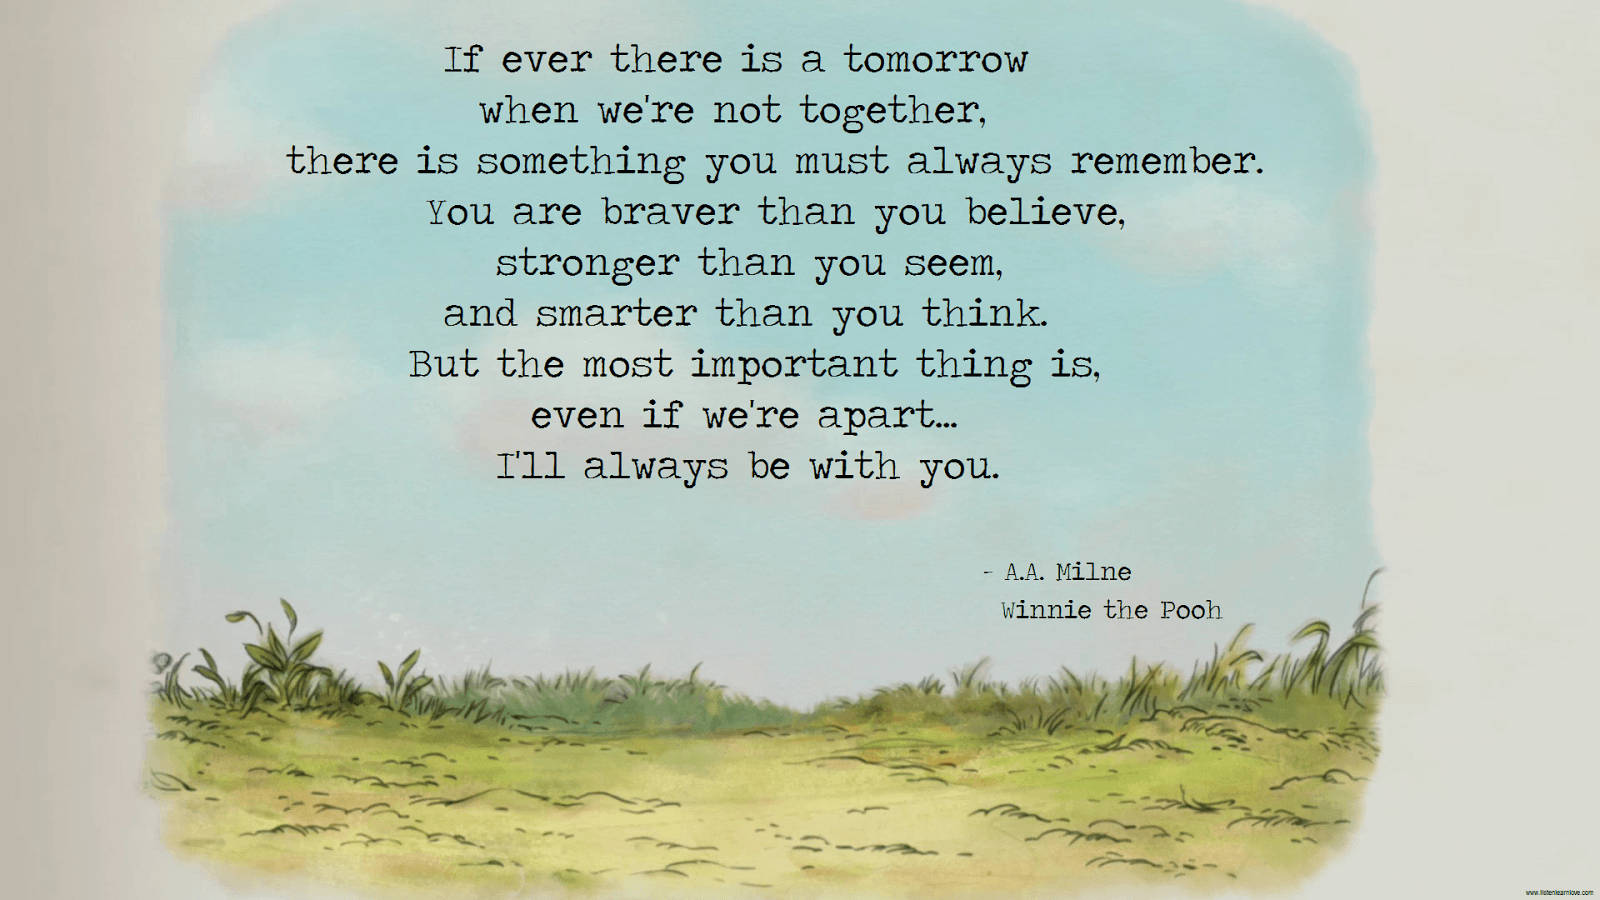 Winnie The Pooh Quotes Of Being Alone Wallpaper